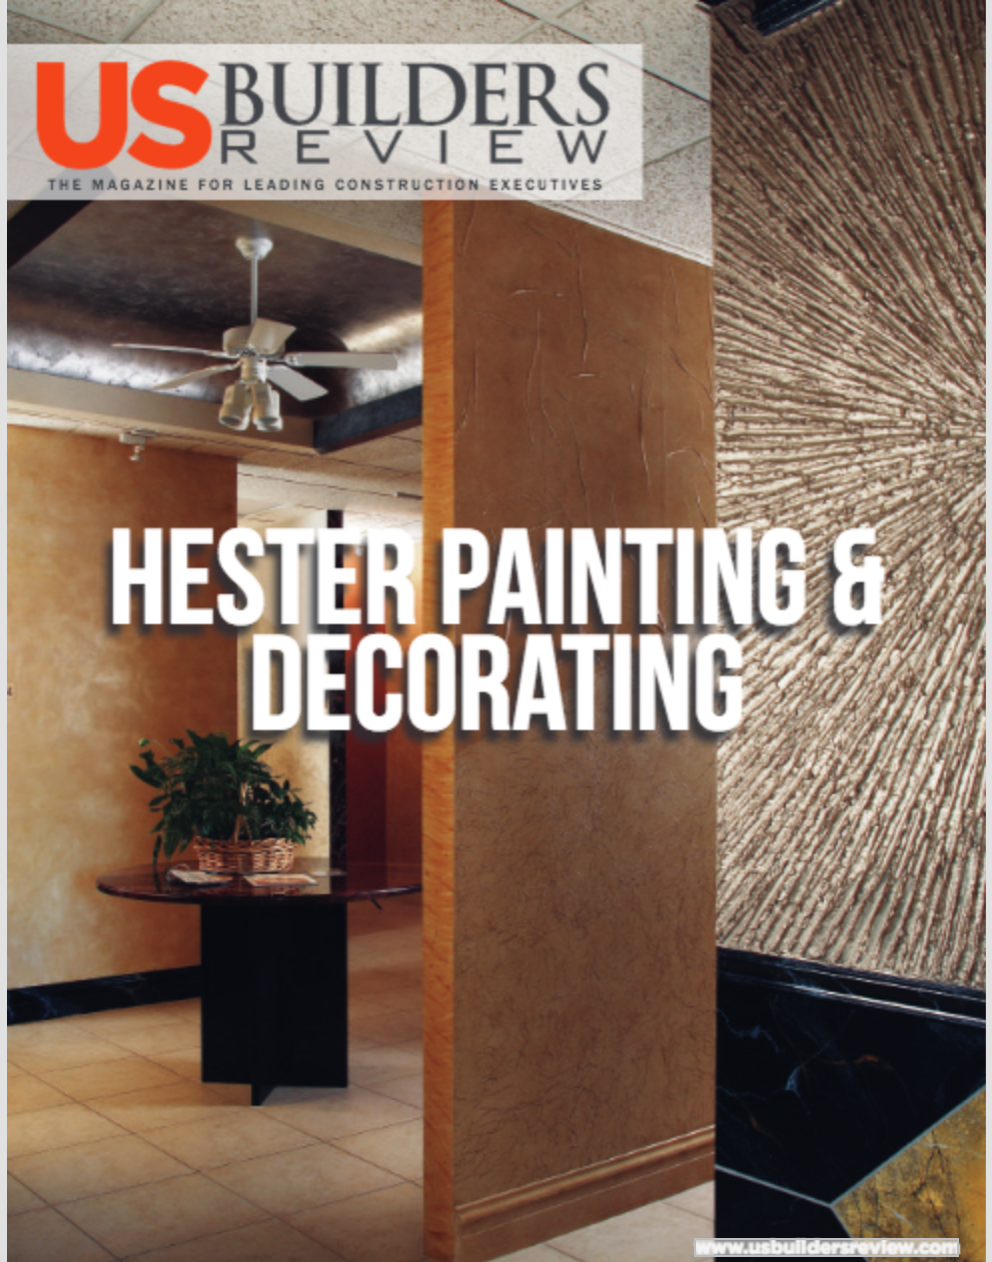 Hester Stars in a Case Study for US Builders Review